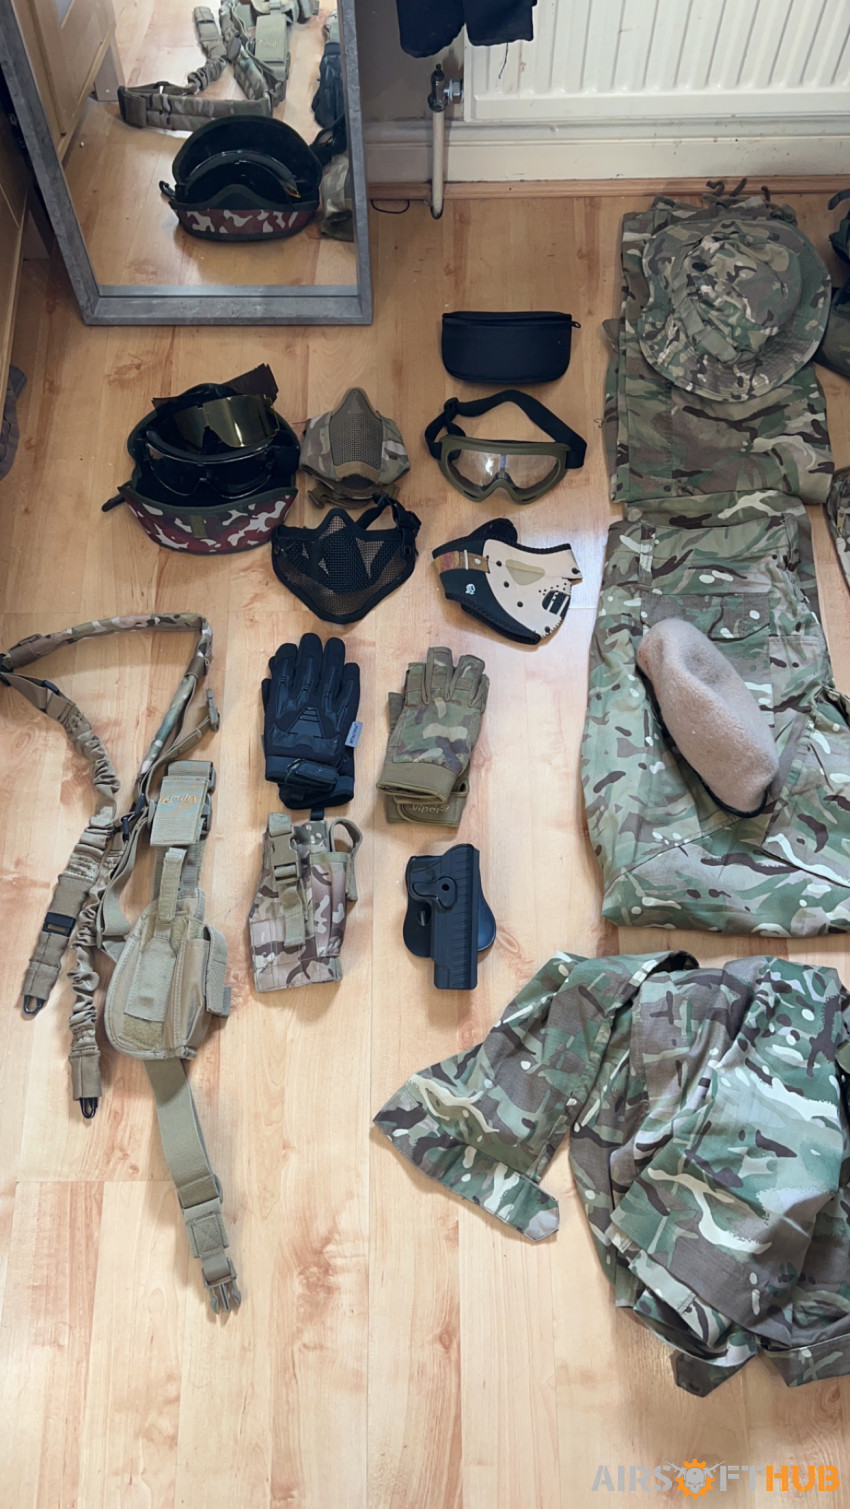 Clutter - Used airsoft equipment